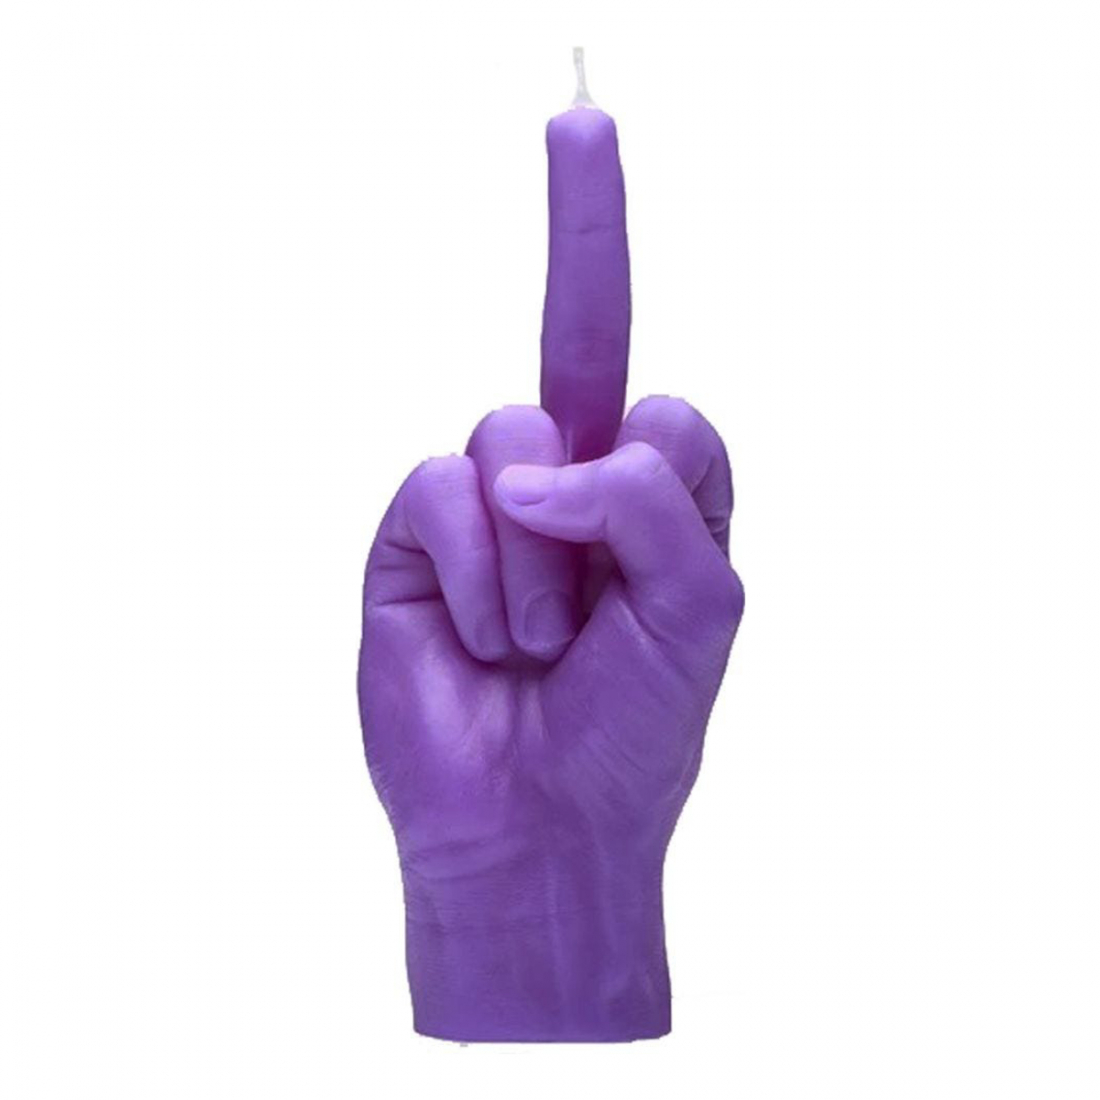 Women's 'Fcuk You' Candle